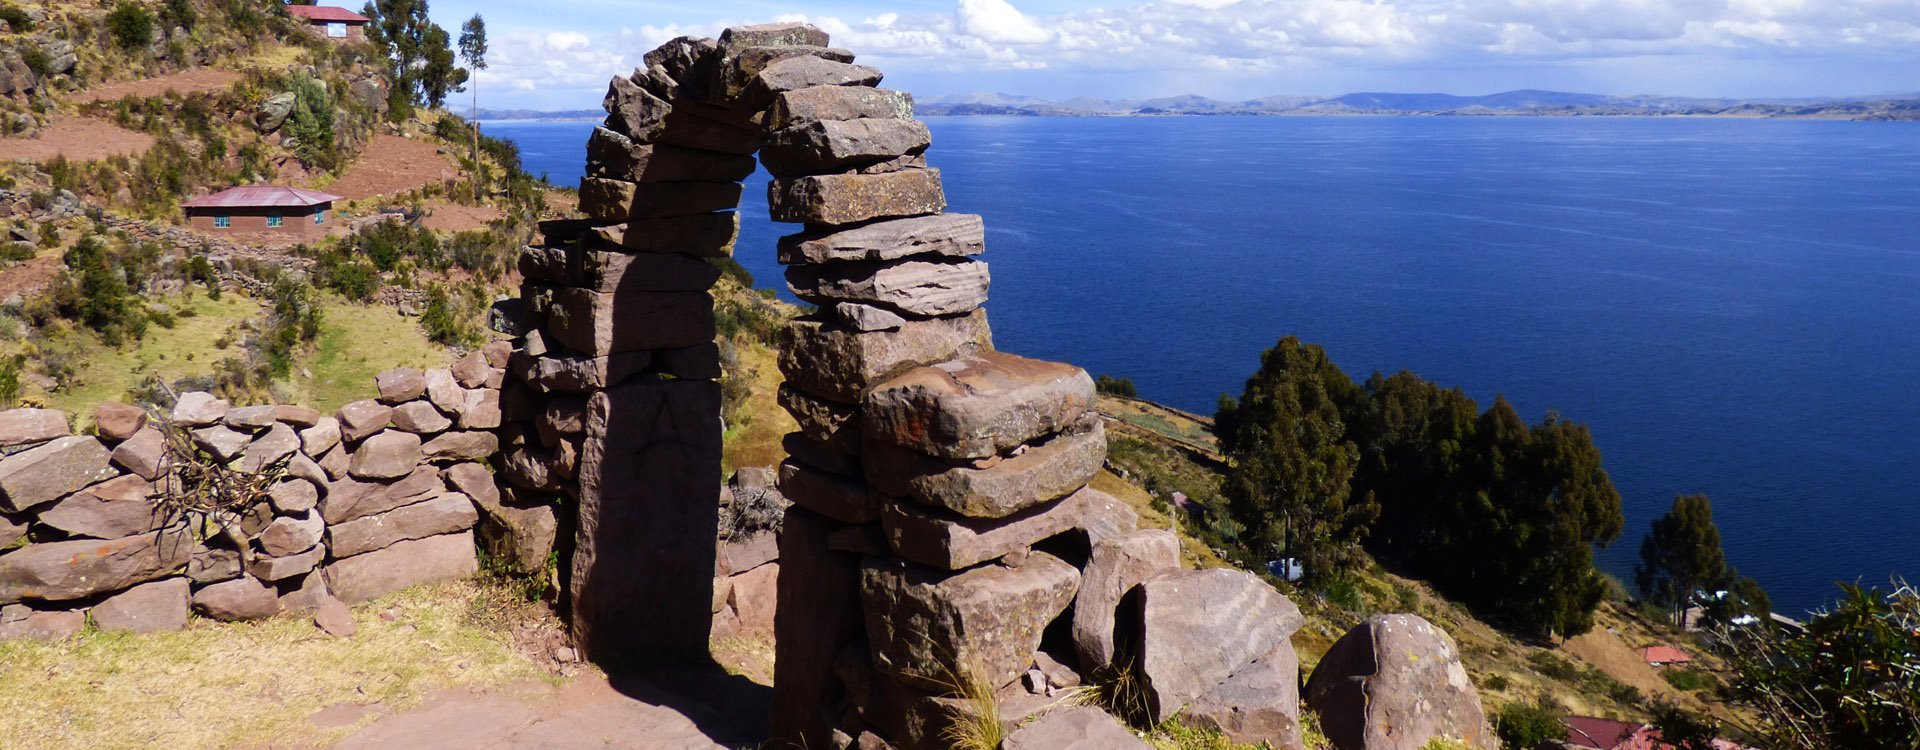 Panoramic view from Village on Taquile island in Titicaca lake, Peru. South America